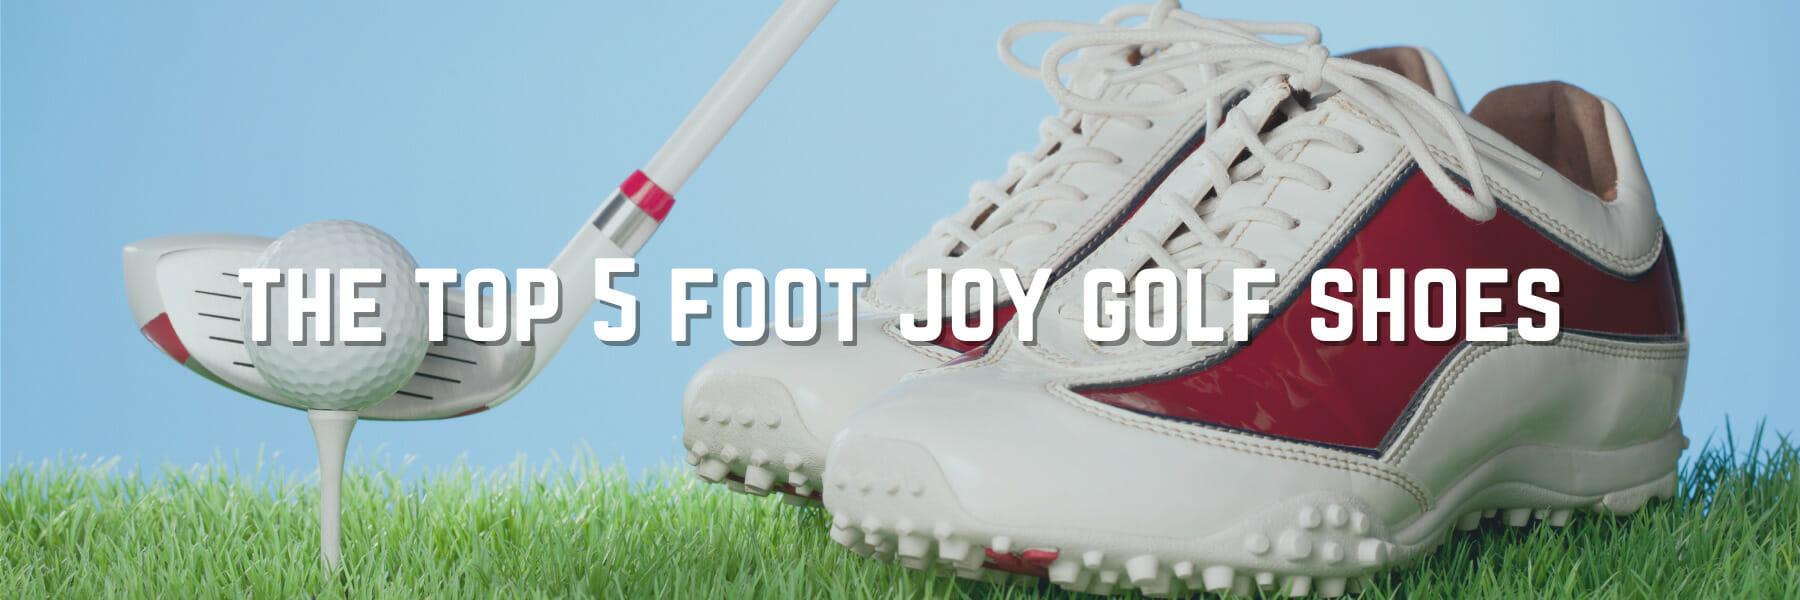 The Best Footjoy Golf Shoes You Must Own For Men